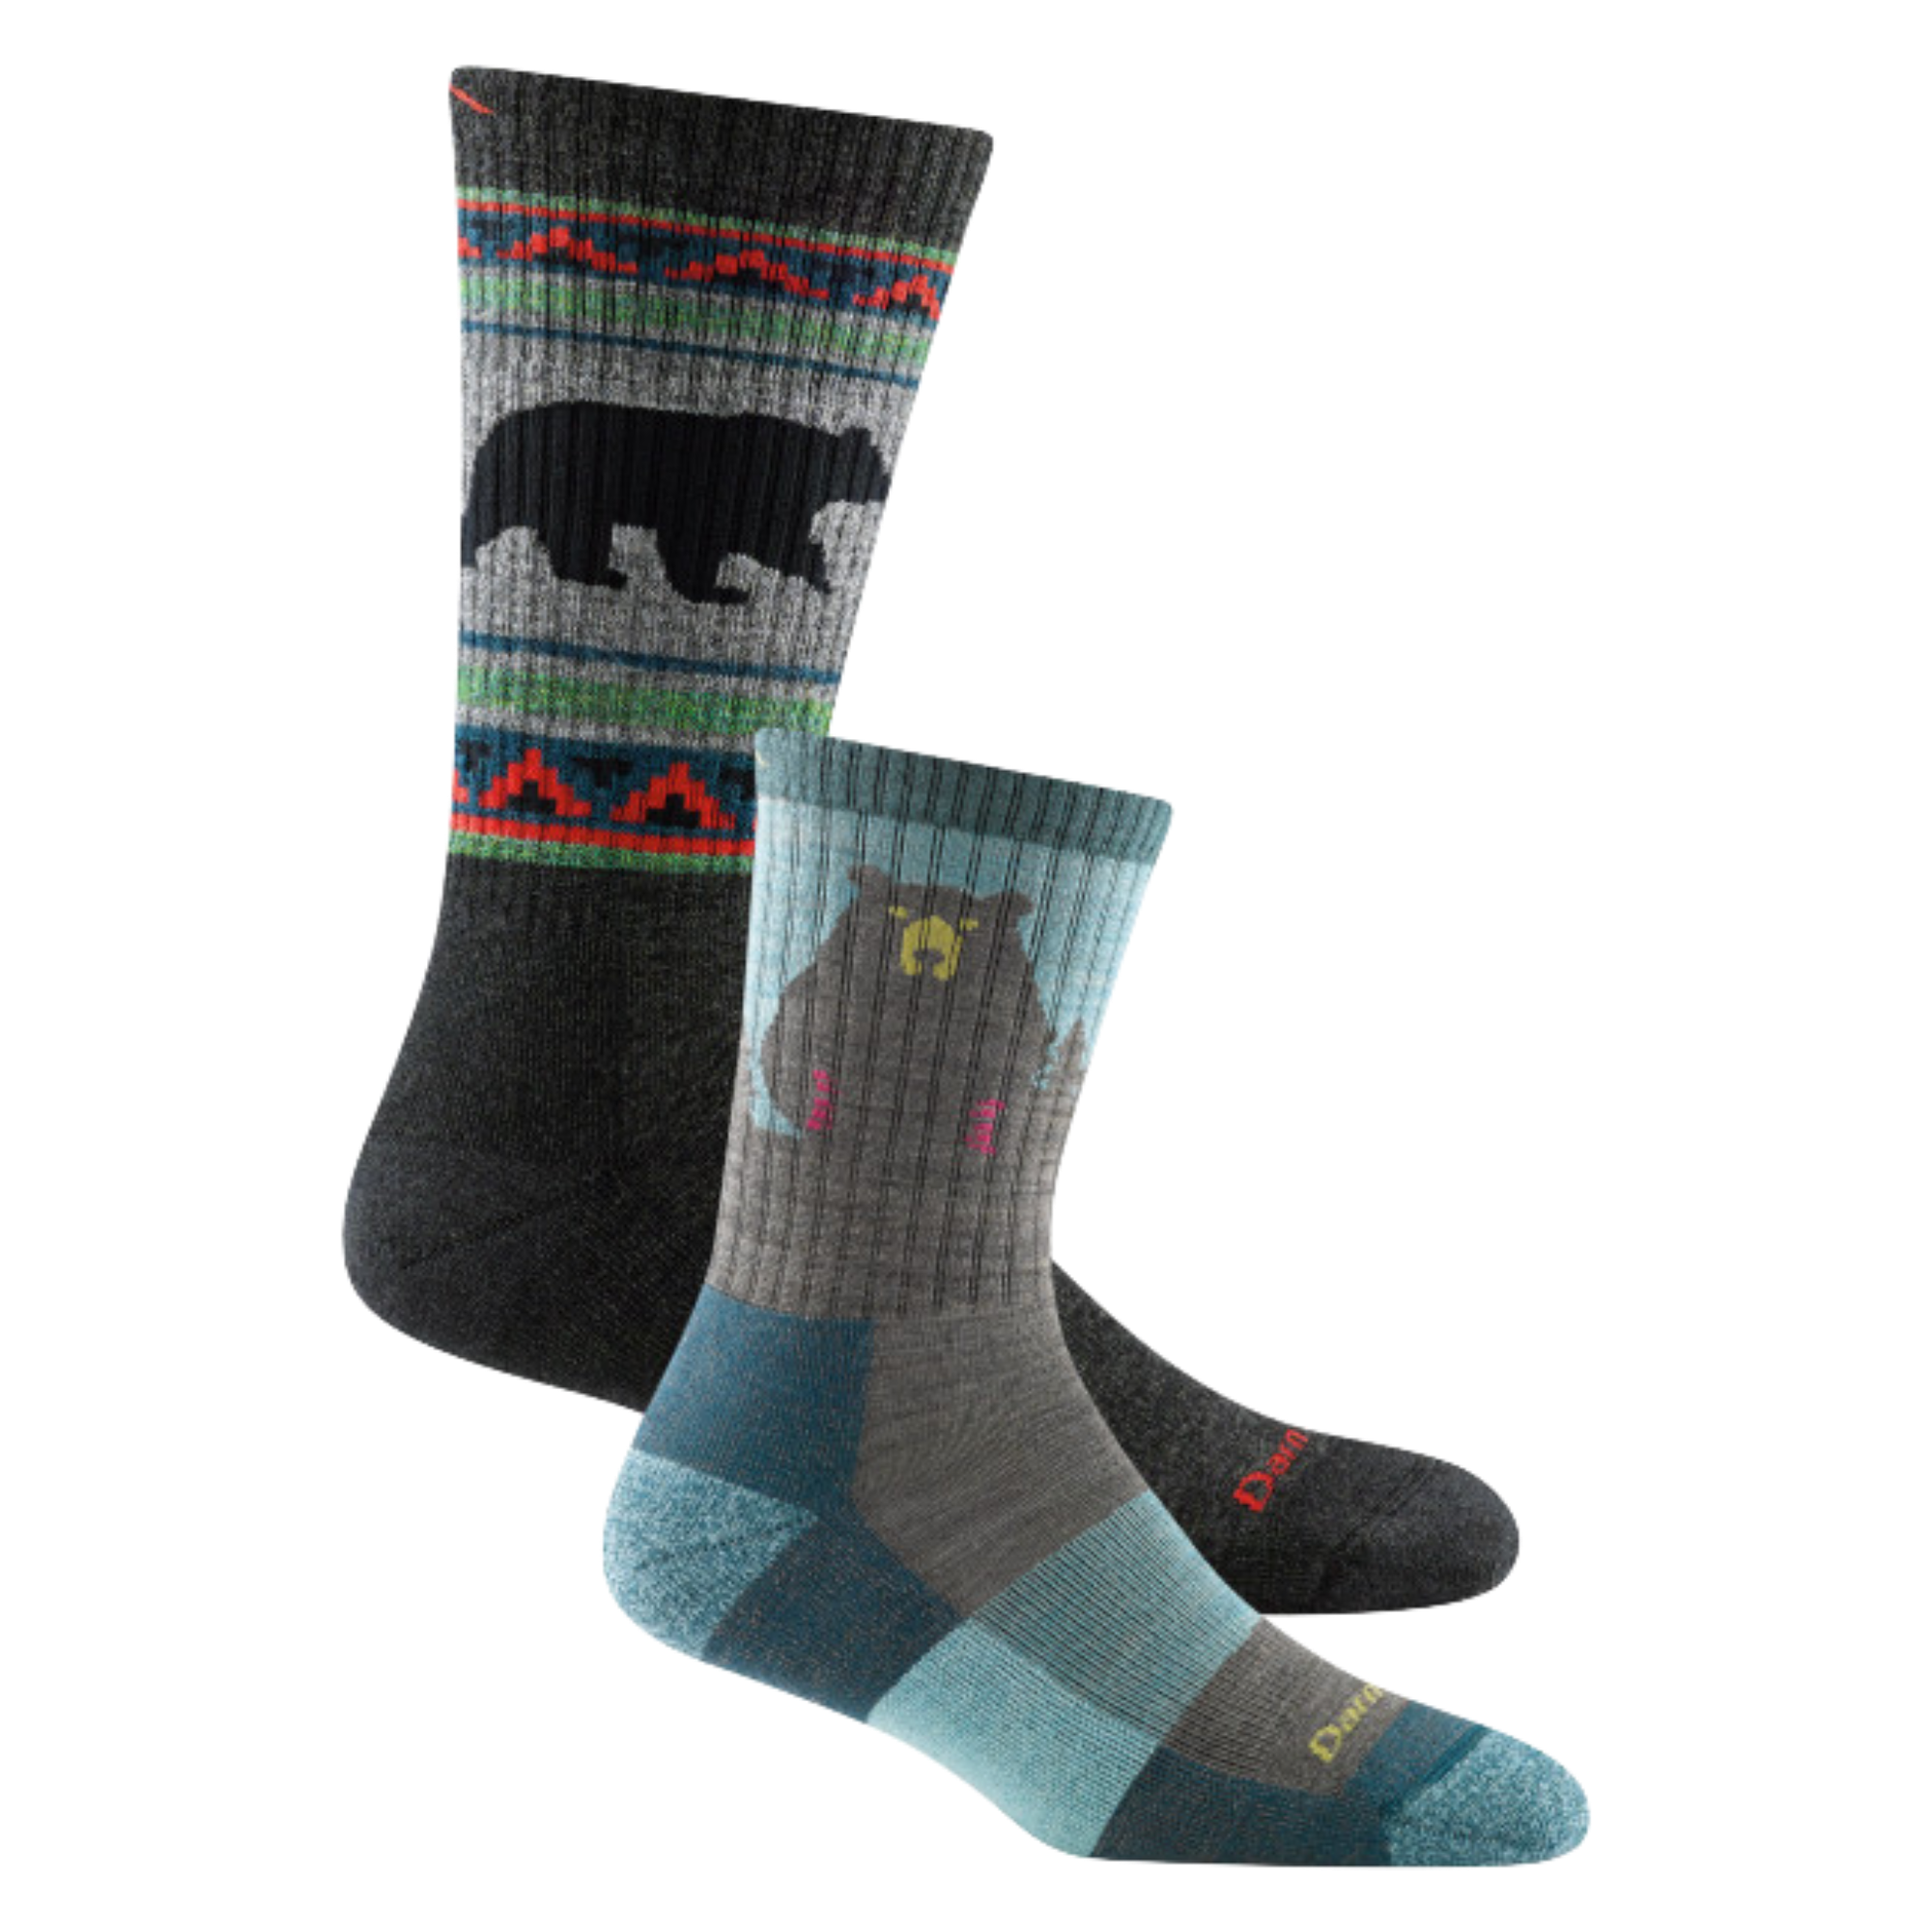 2 pack bundle shot including the men's vangrizzle boot sock in charcoal and the women's bear town micro crew sock in purple